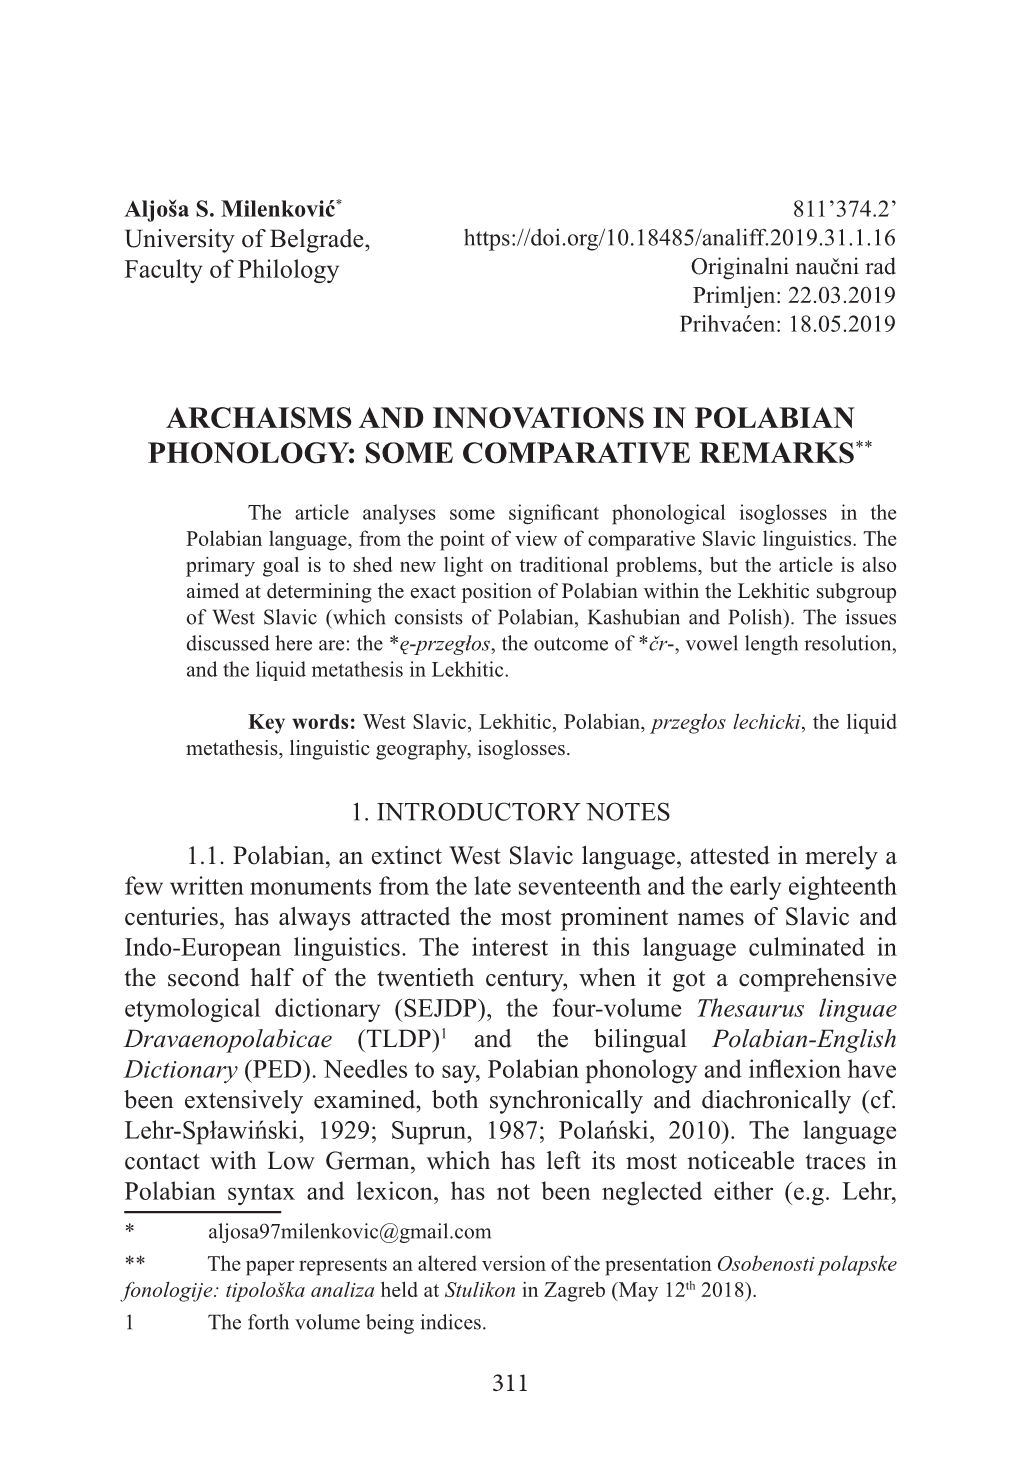 Archaisms and Innovations in Polabian Phonology: Some Comparative Remarks**2